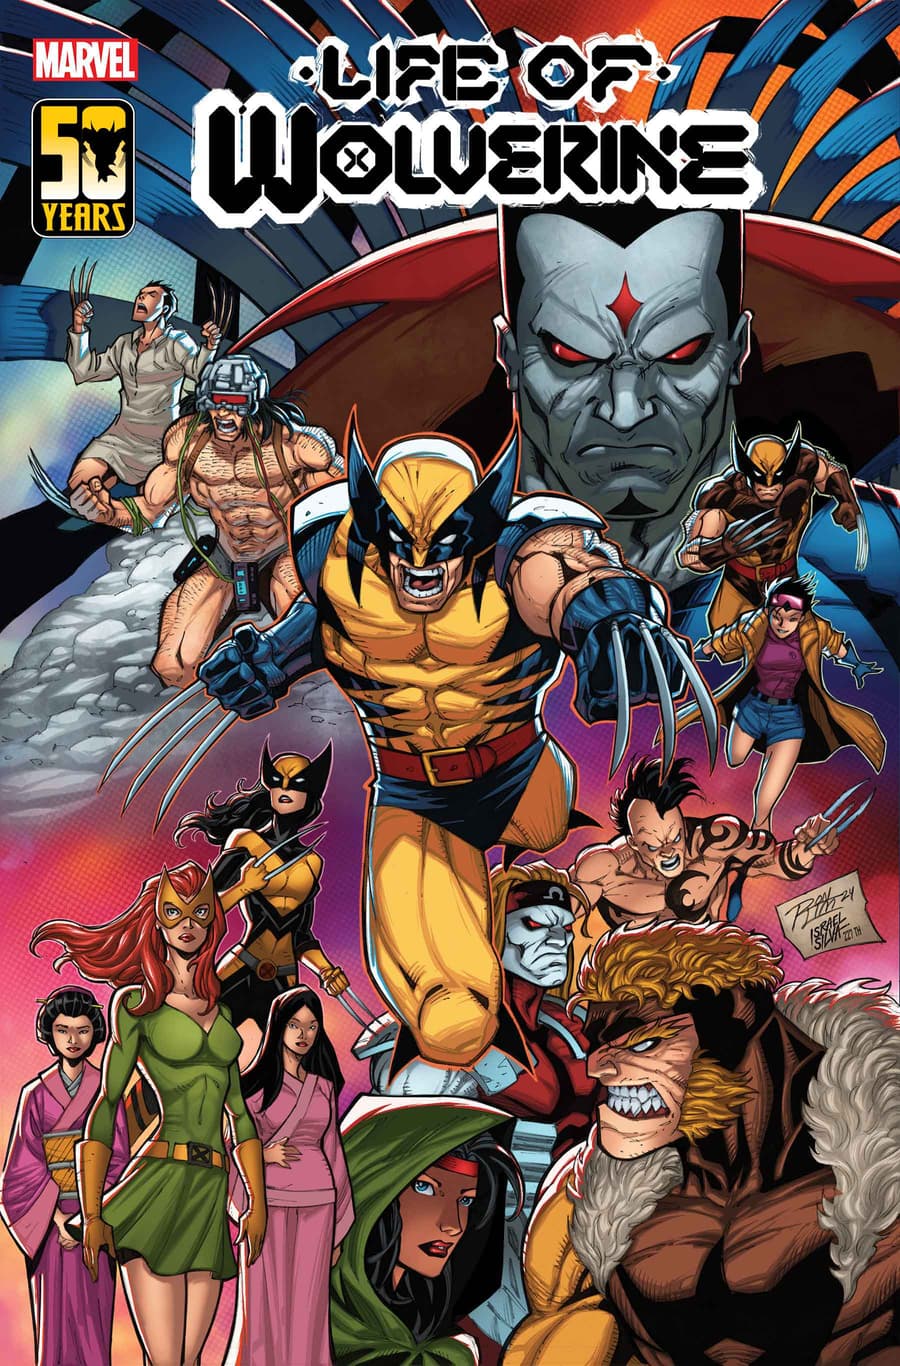 LIFE OF WOLVERINE #1 cover by Ron Lim